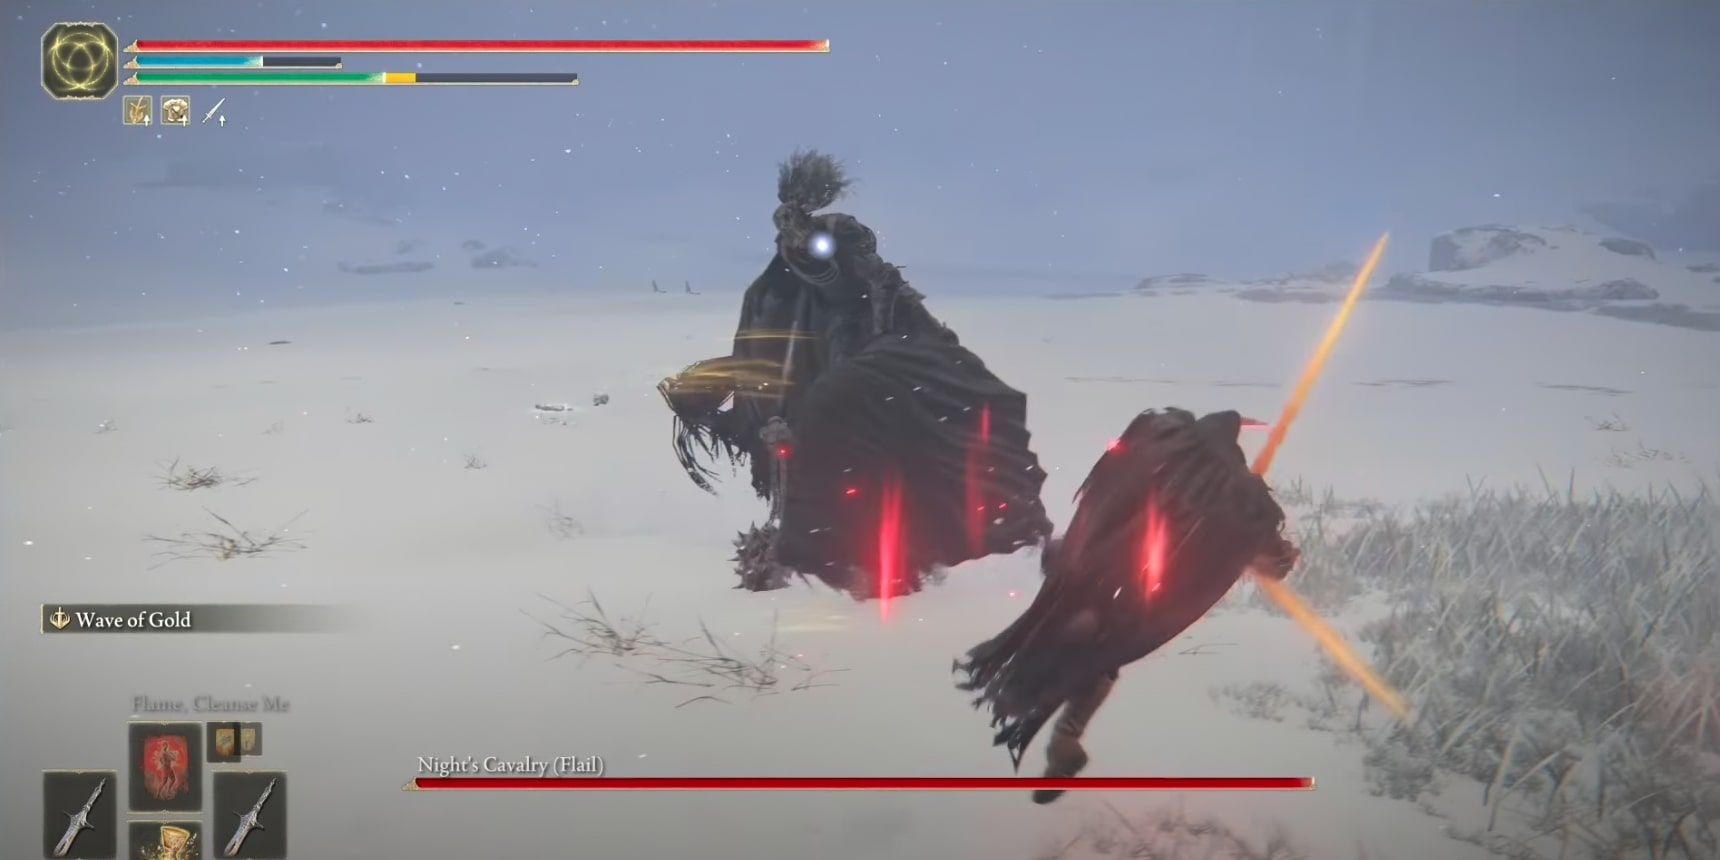 Elden Ring Night's Cavalry (Flail) boss at Consecrated Snowfield